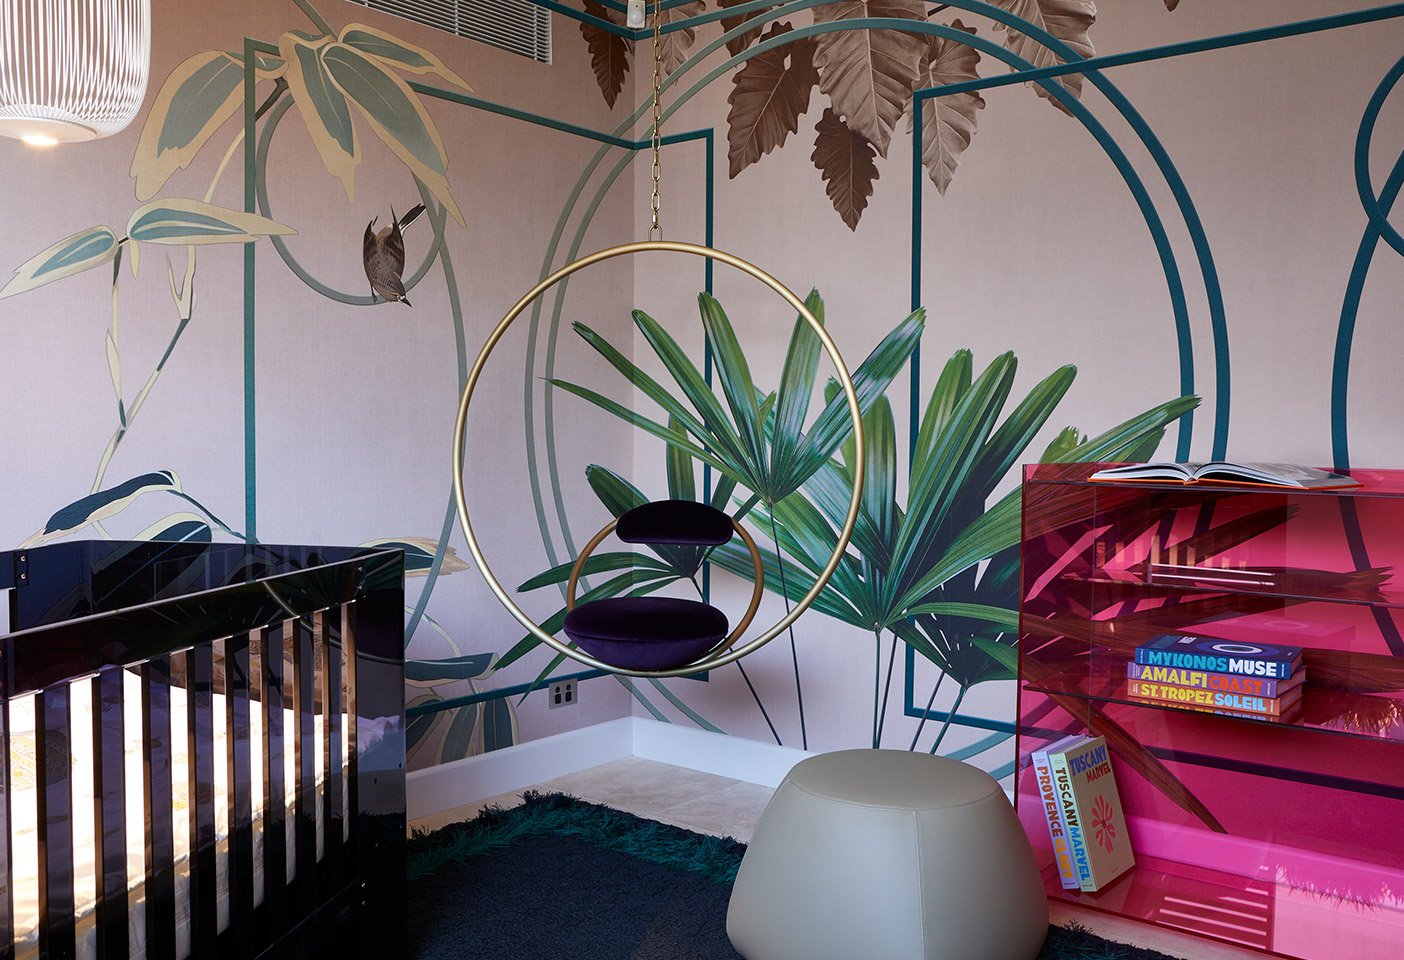 The brief here was to create a nursery like no other. A colourful wall-finishing by Glamoura adds an element of theatricality to a traditionally quiet room, while a swing by Lee Broom brings motion and energy to the space.